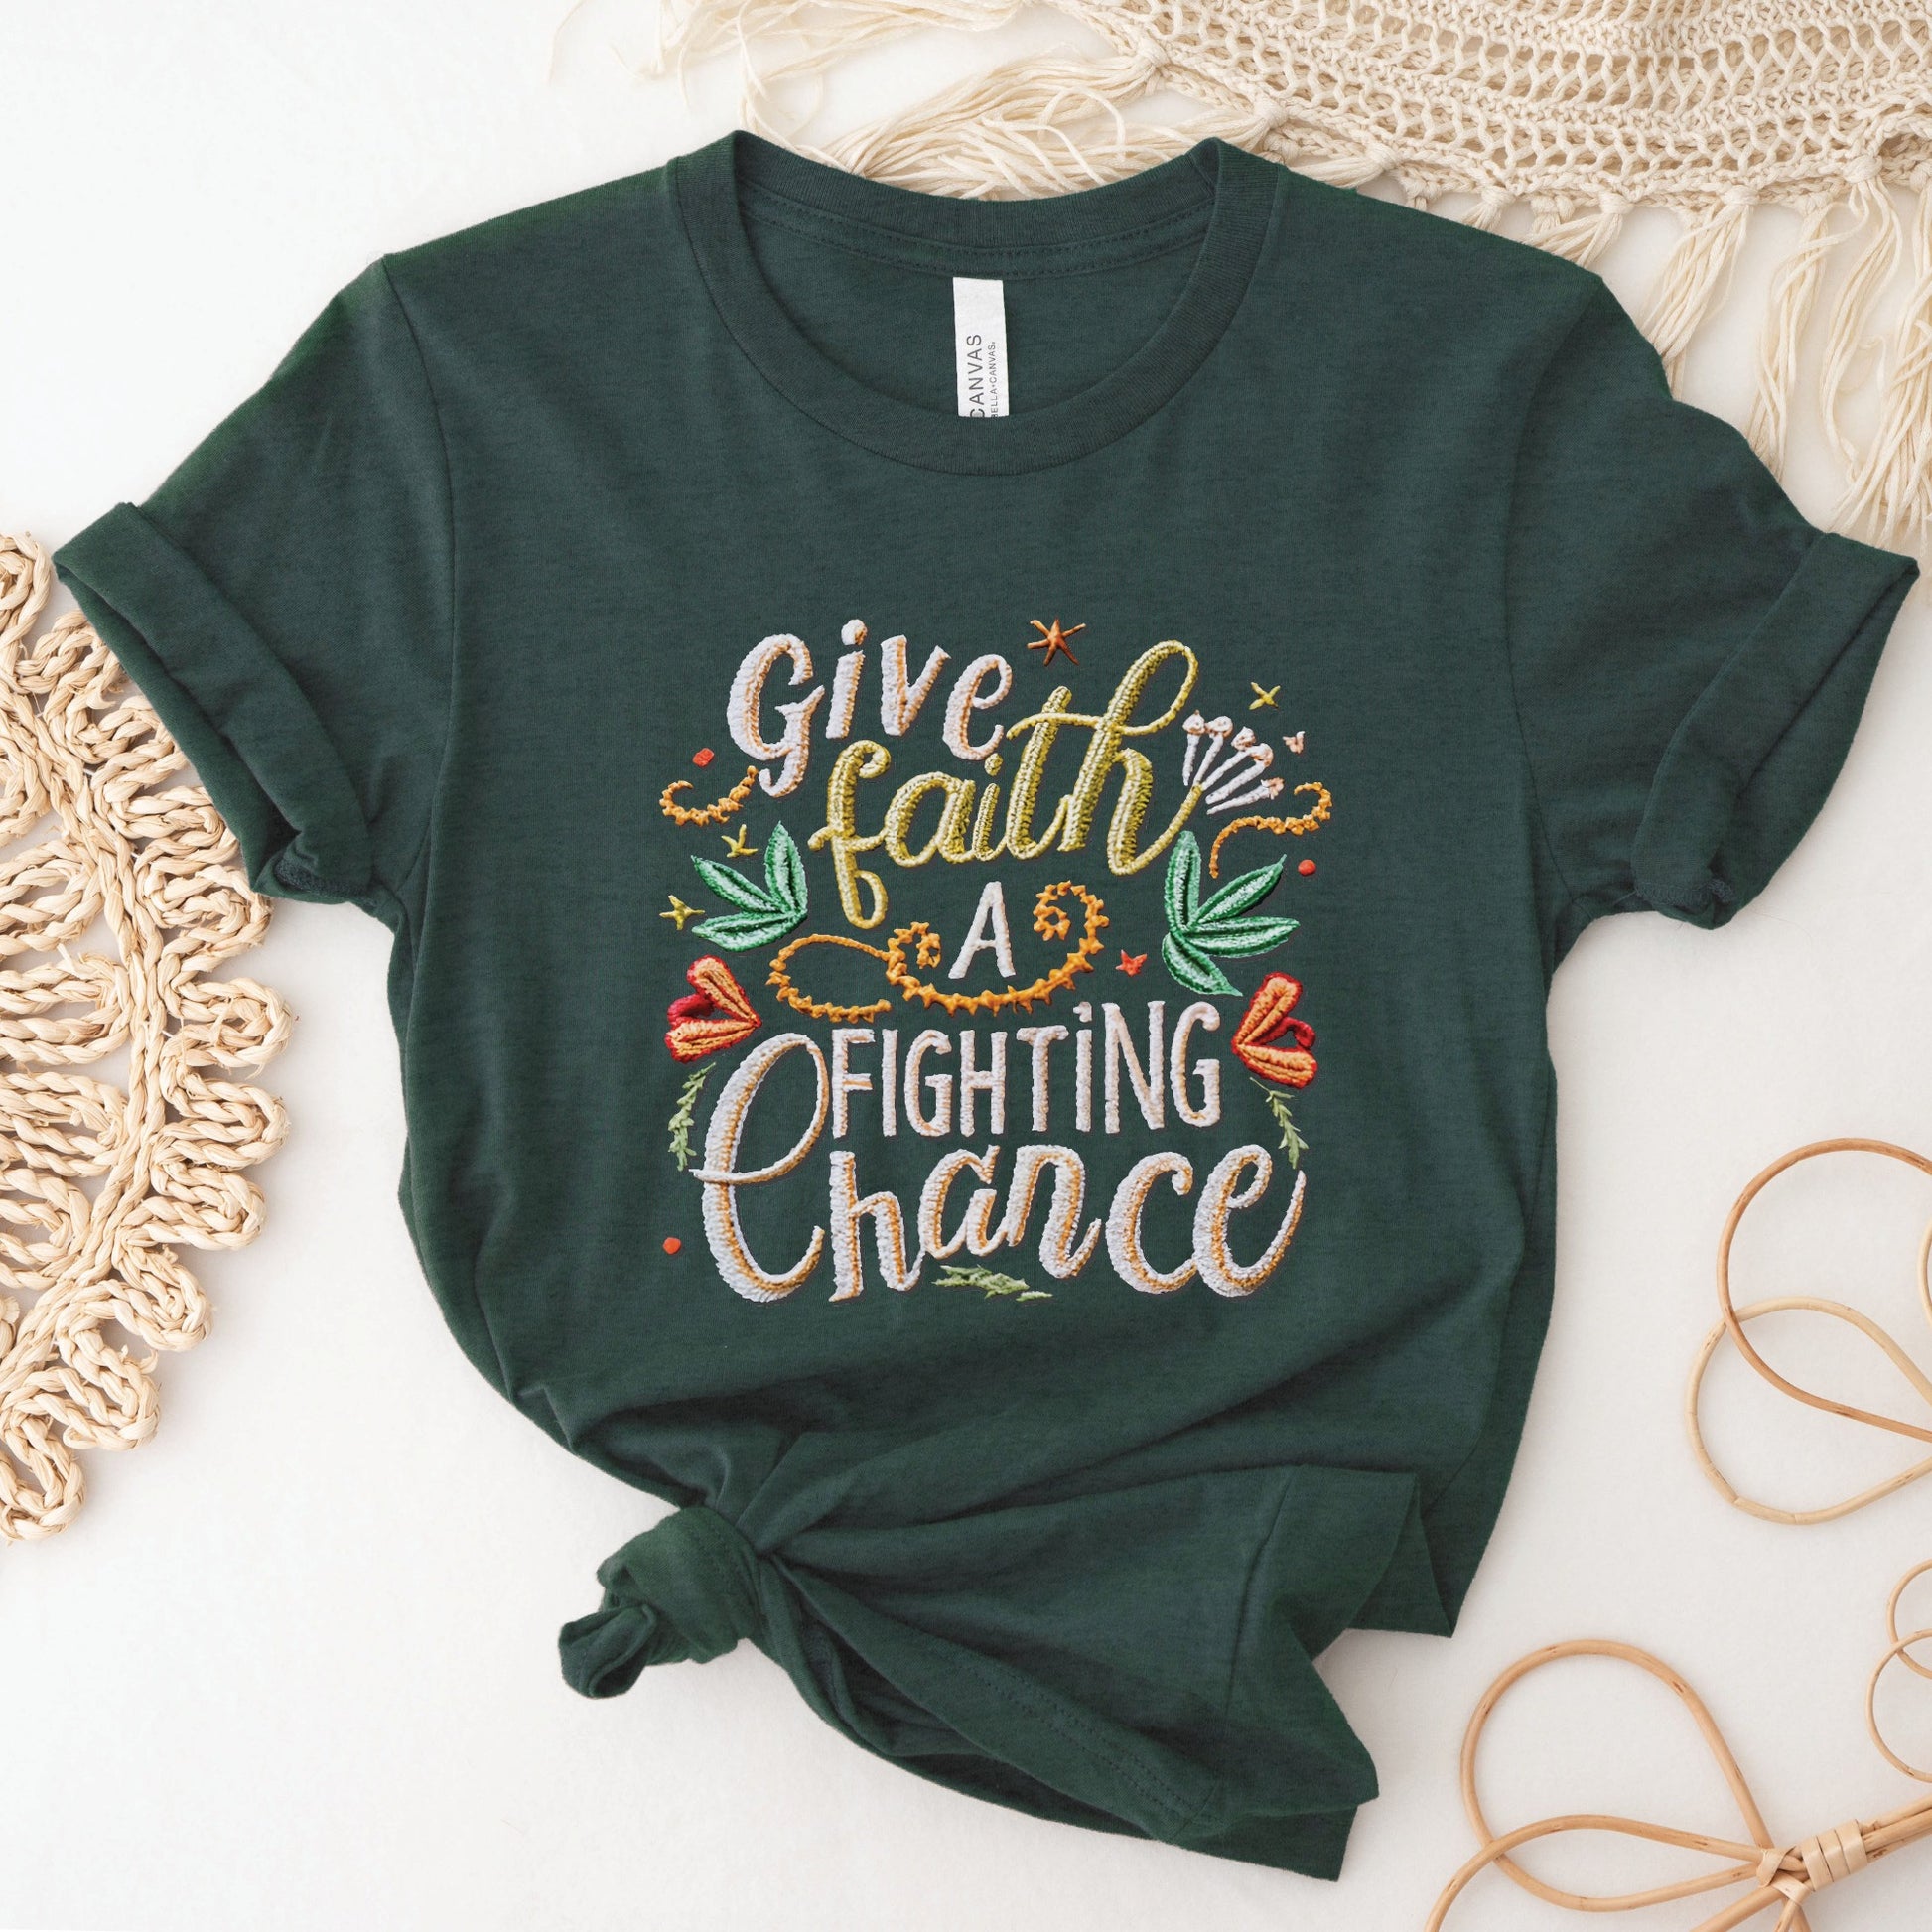 Heather forest dark green soft t-shirt with printed embroidery font Christian Bible verse quote that says, "Give Faith A Fighting Chance" with flower and leaf graphics, faith-based t-shirt designed for women